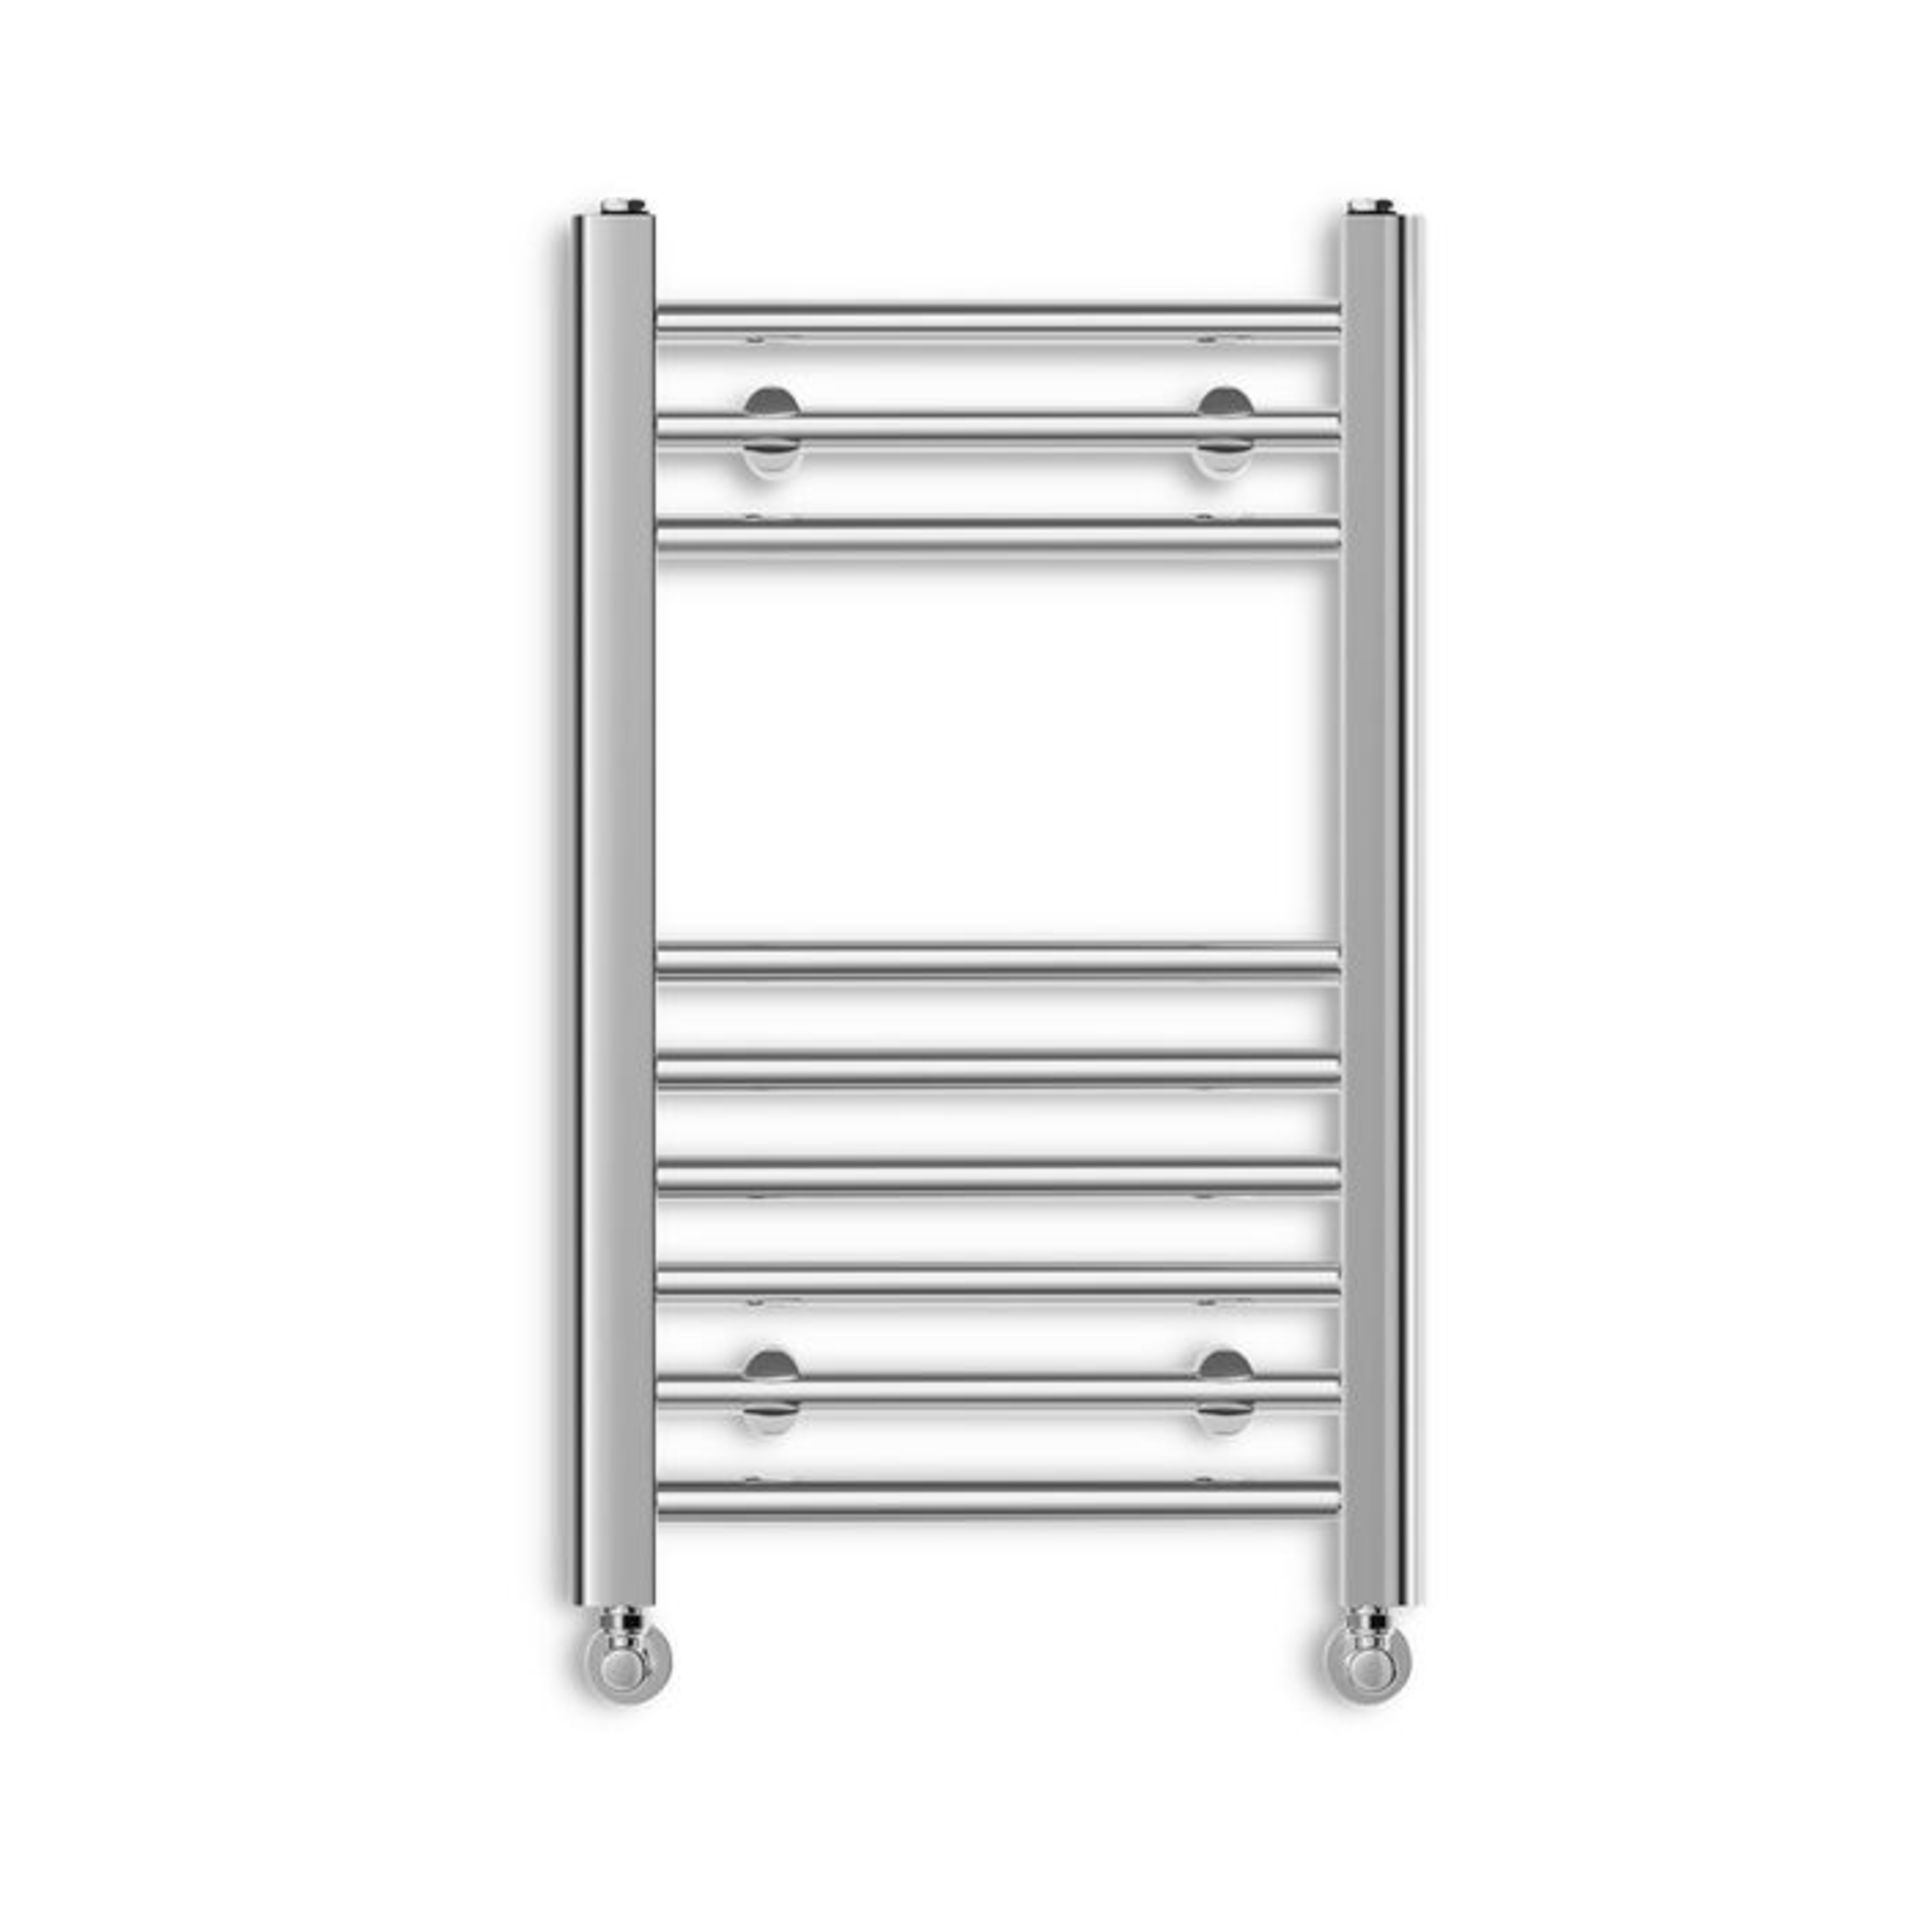 (HP183) 650x400mm Straight Heated Towel Radiator. Low carbon steel chrome plated radiator. This - Image 2 of 3